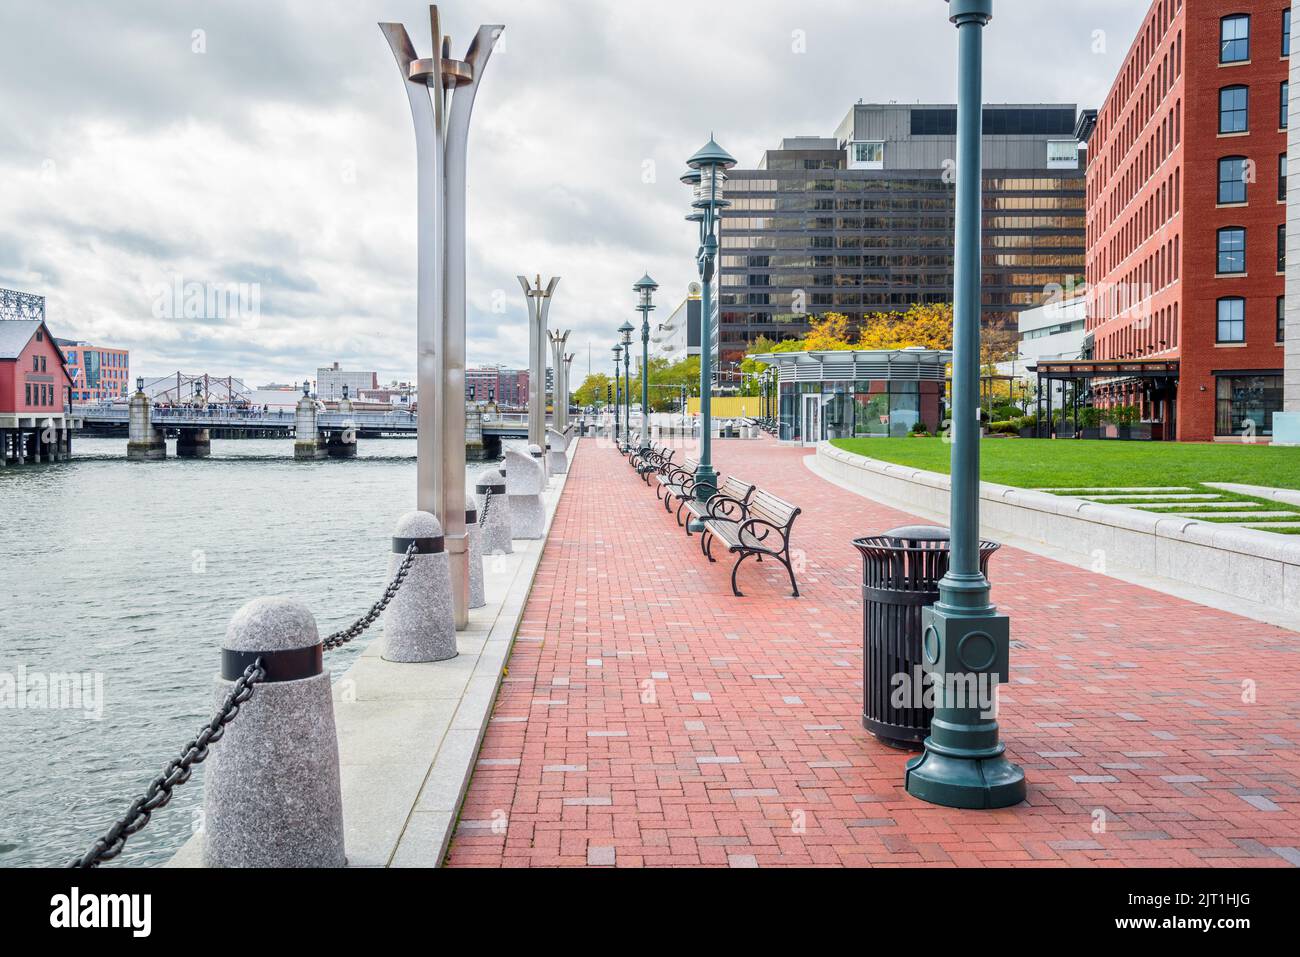 Empty brick waterfront path lined with benches and lamp post on a cloudy autumn day. Boston, MA, USA. Stock Photo